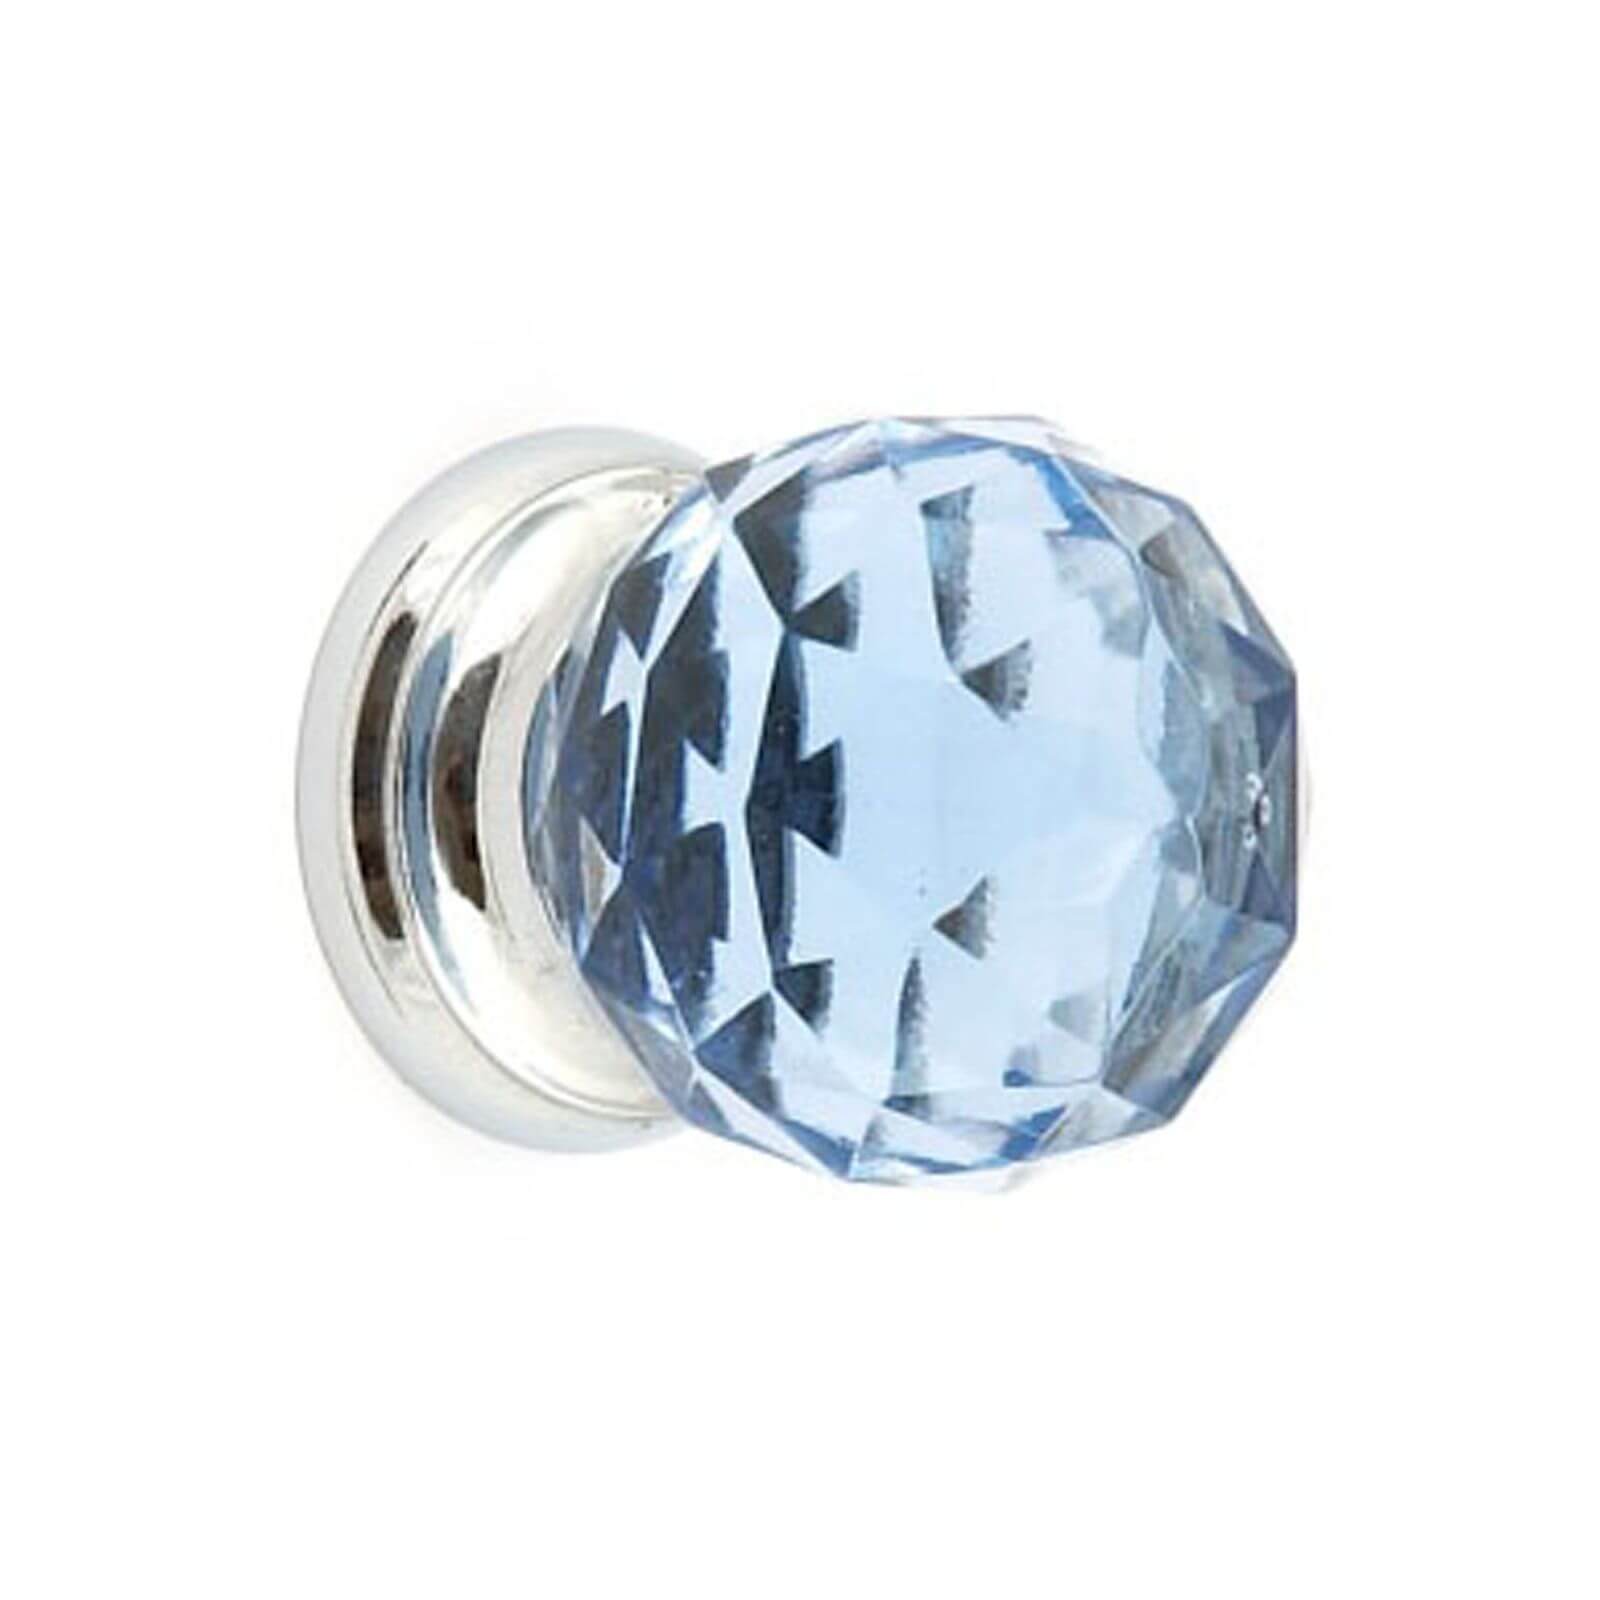 Blue Glass and Chrome Cabinet Door Knob - 38mm